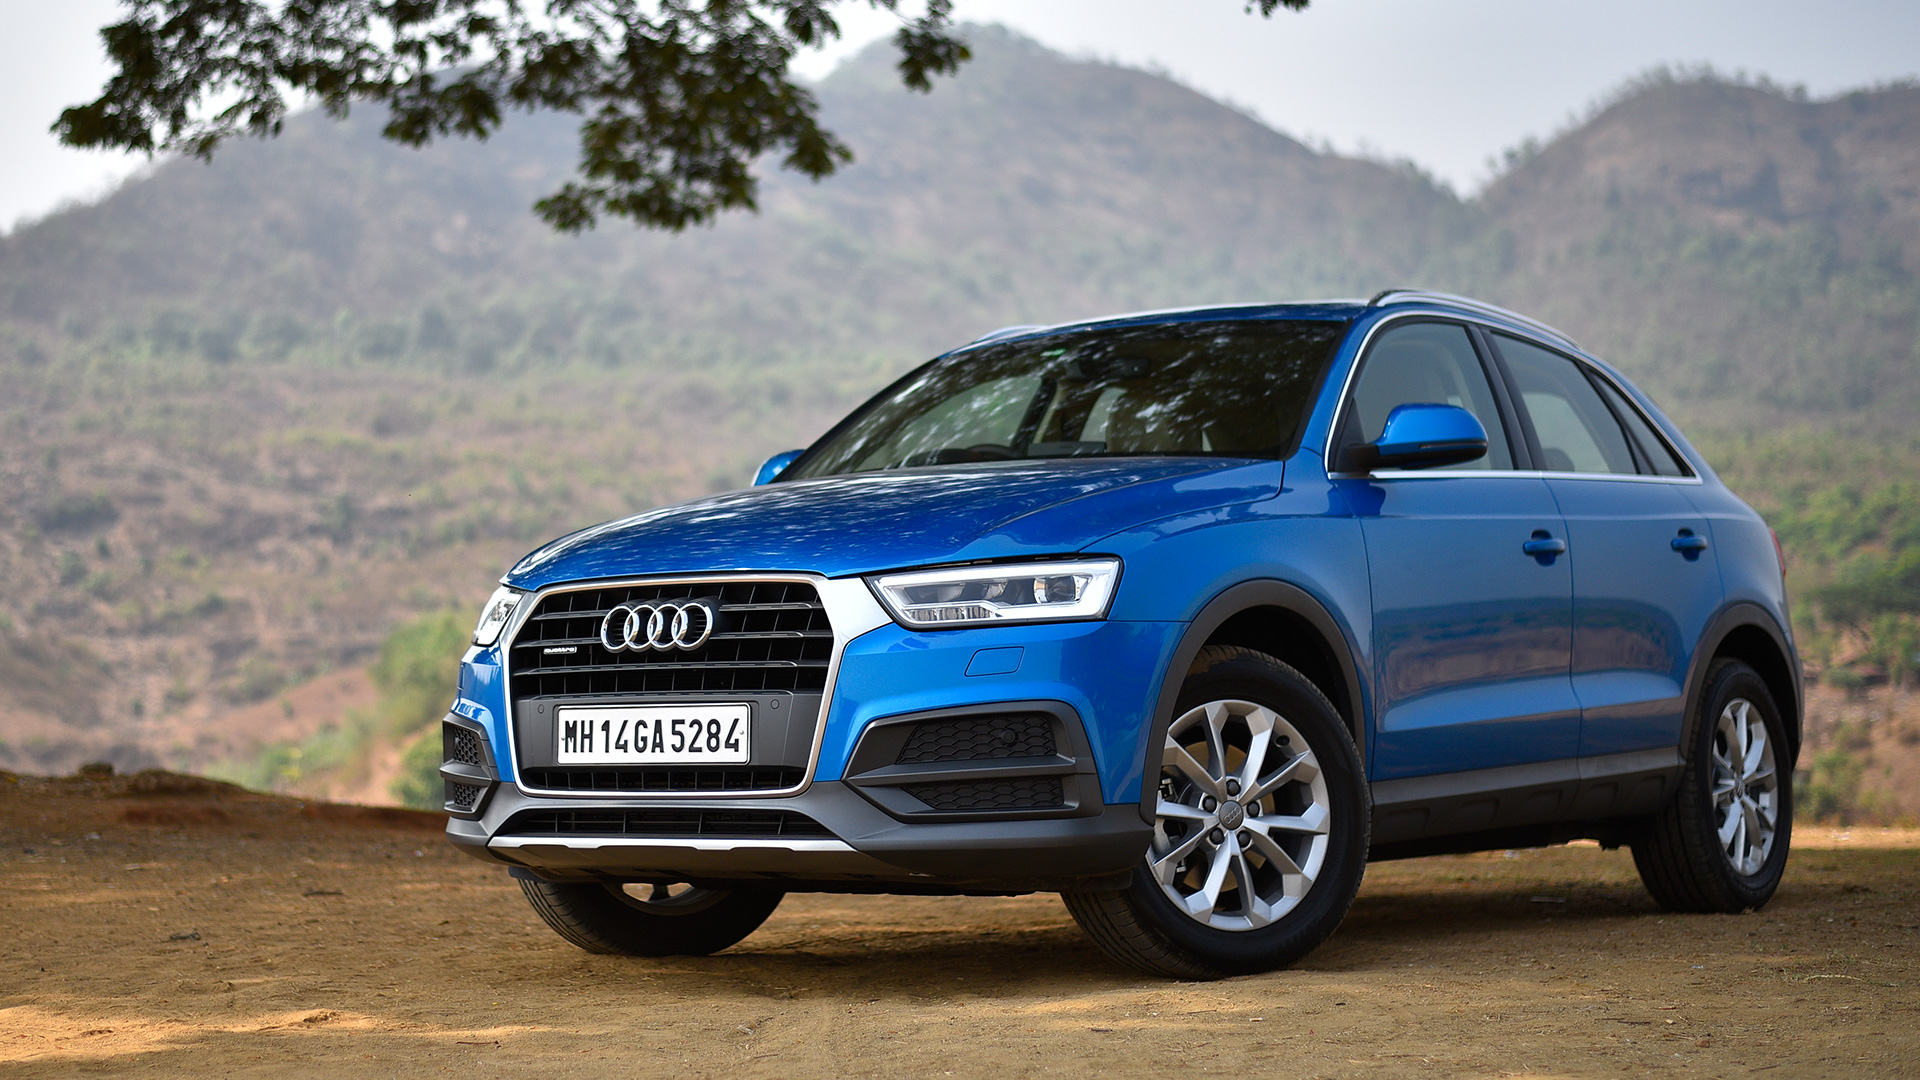 Audi Q3 2017 Price Mileage Reviews Specification Gallery Overdrive